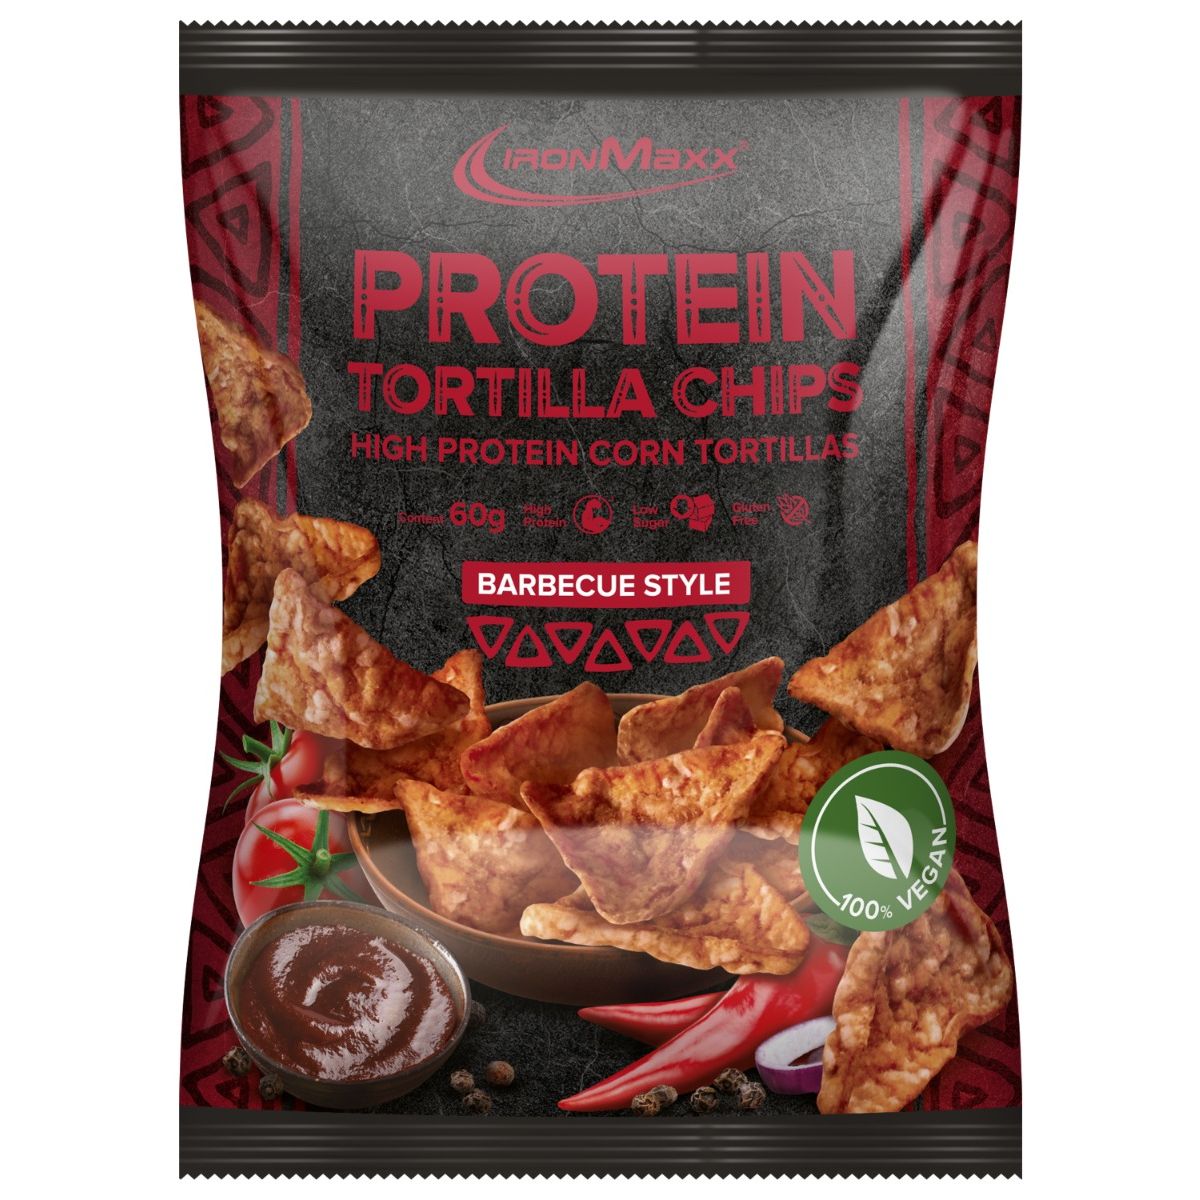 Protein Tortilla Chips (60g) - Barbecue Style